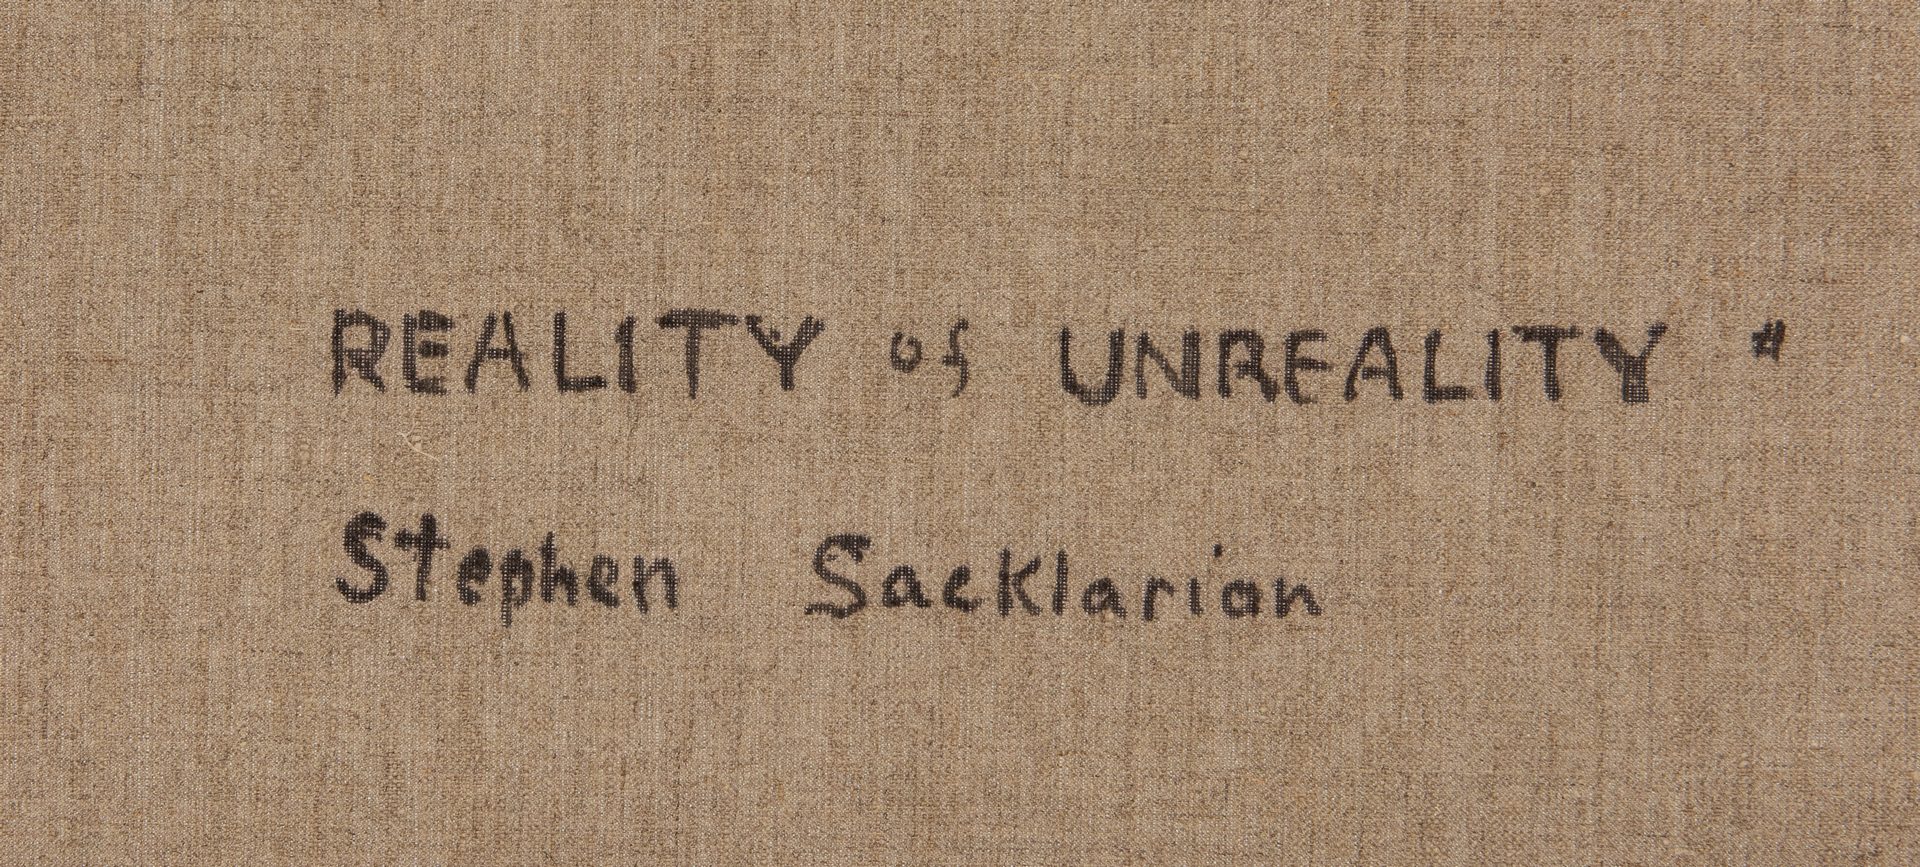 Lot 542: Reality of Unreality (E-9) by Sacklarian